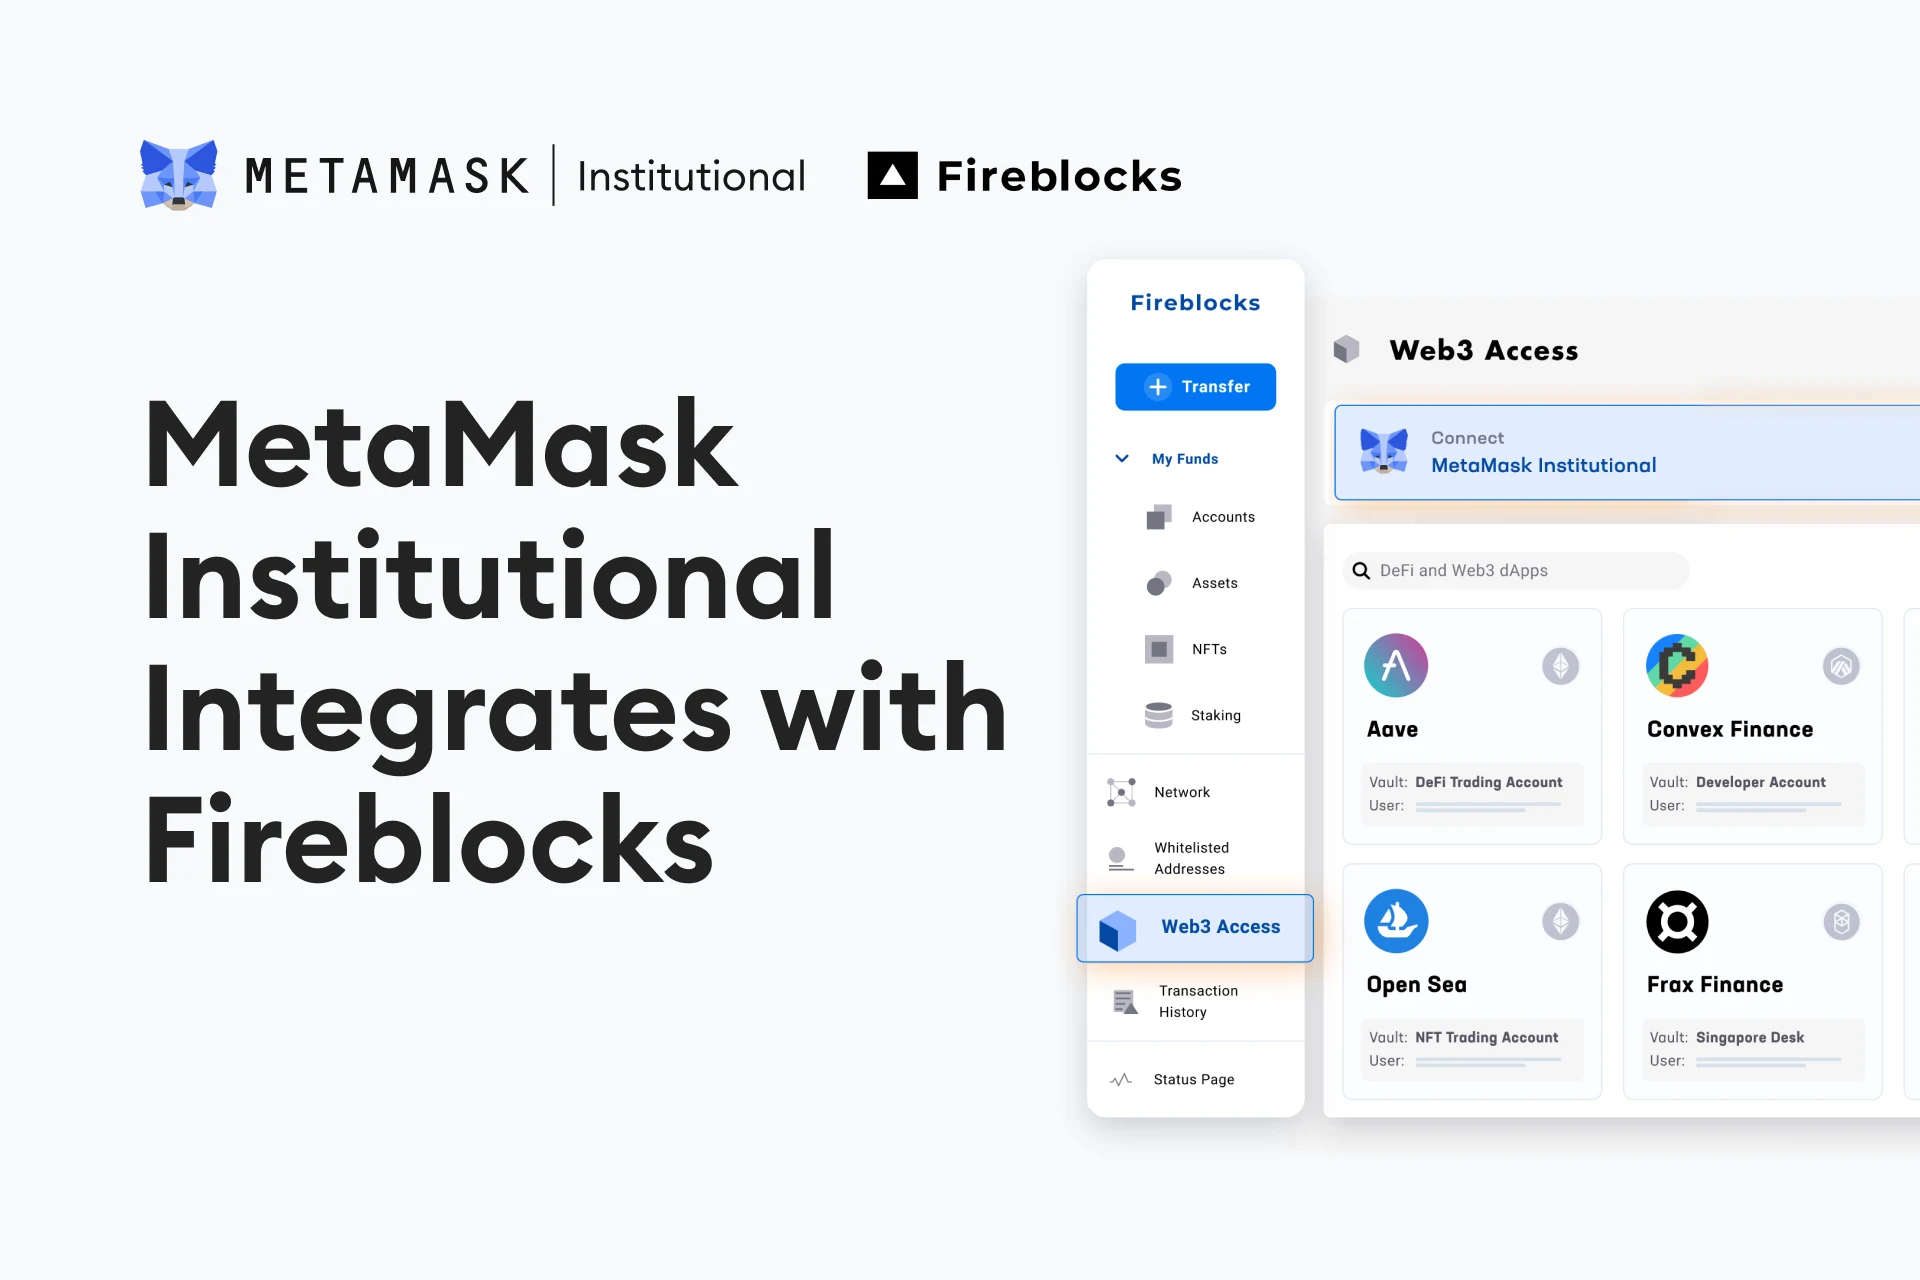 Image: MetaMask Institutional and Fireblocks Integrate to Offer Unrivaled DeFi and Web3 Access to Institutional Investors and Builders